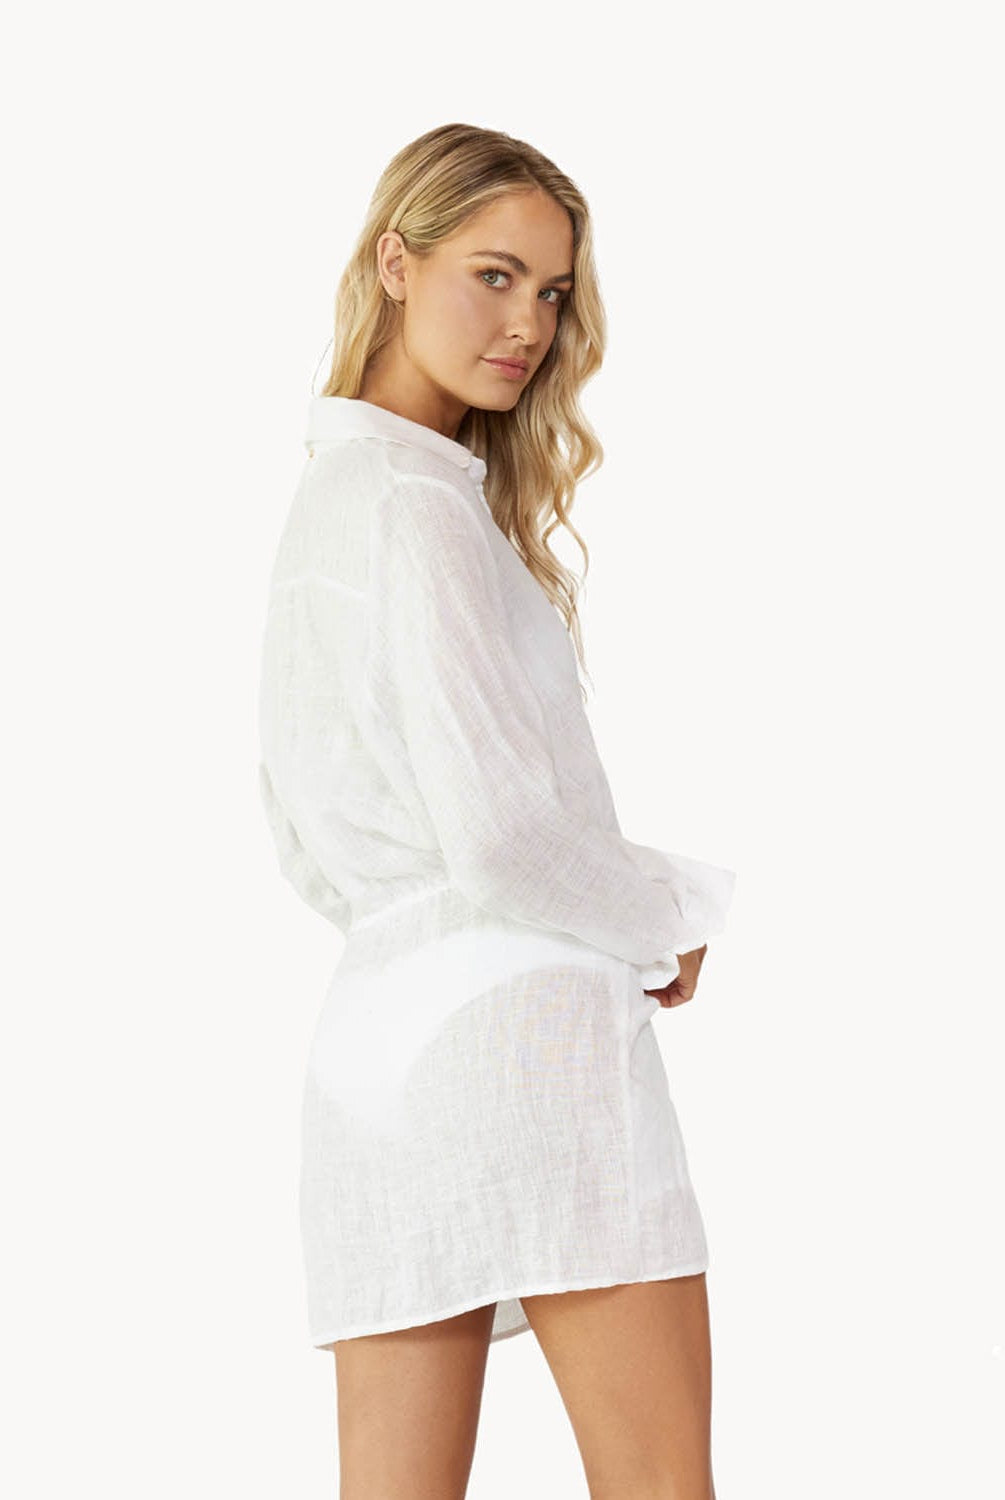 Blonde woman wearing a lightweight white linen button coverup with front-tie detail facing backwards towards white wall.